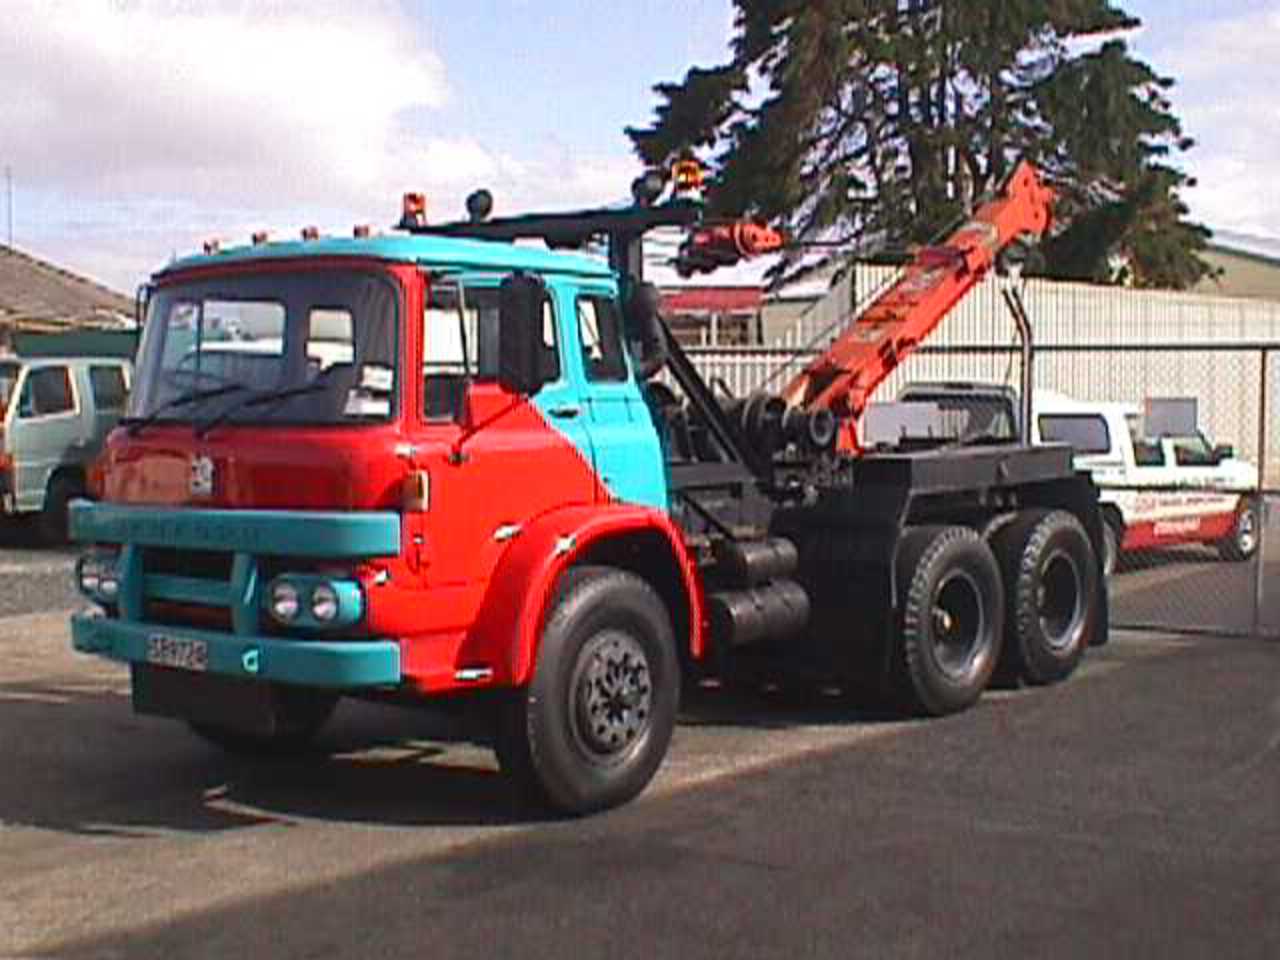 Bedford Km Heavy Salvage Truck Photo, Detailed about Bedford Km ...